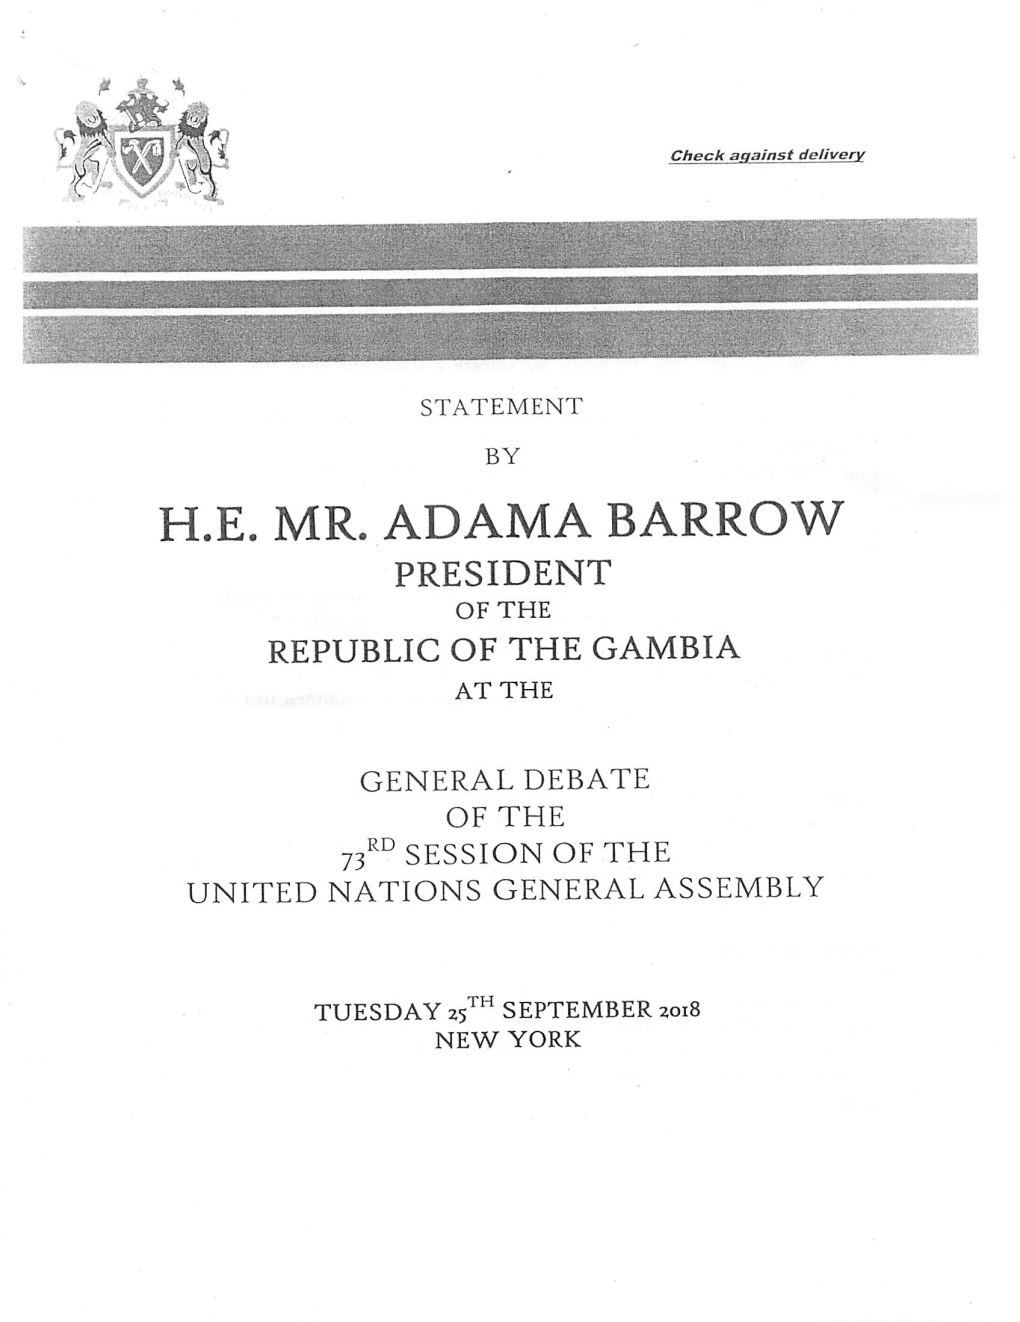 H.E. Mr. Adama Barrow President of the Republic of the Gambia at The